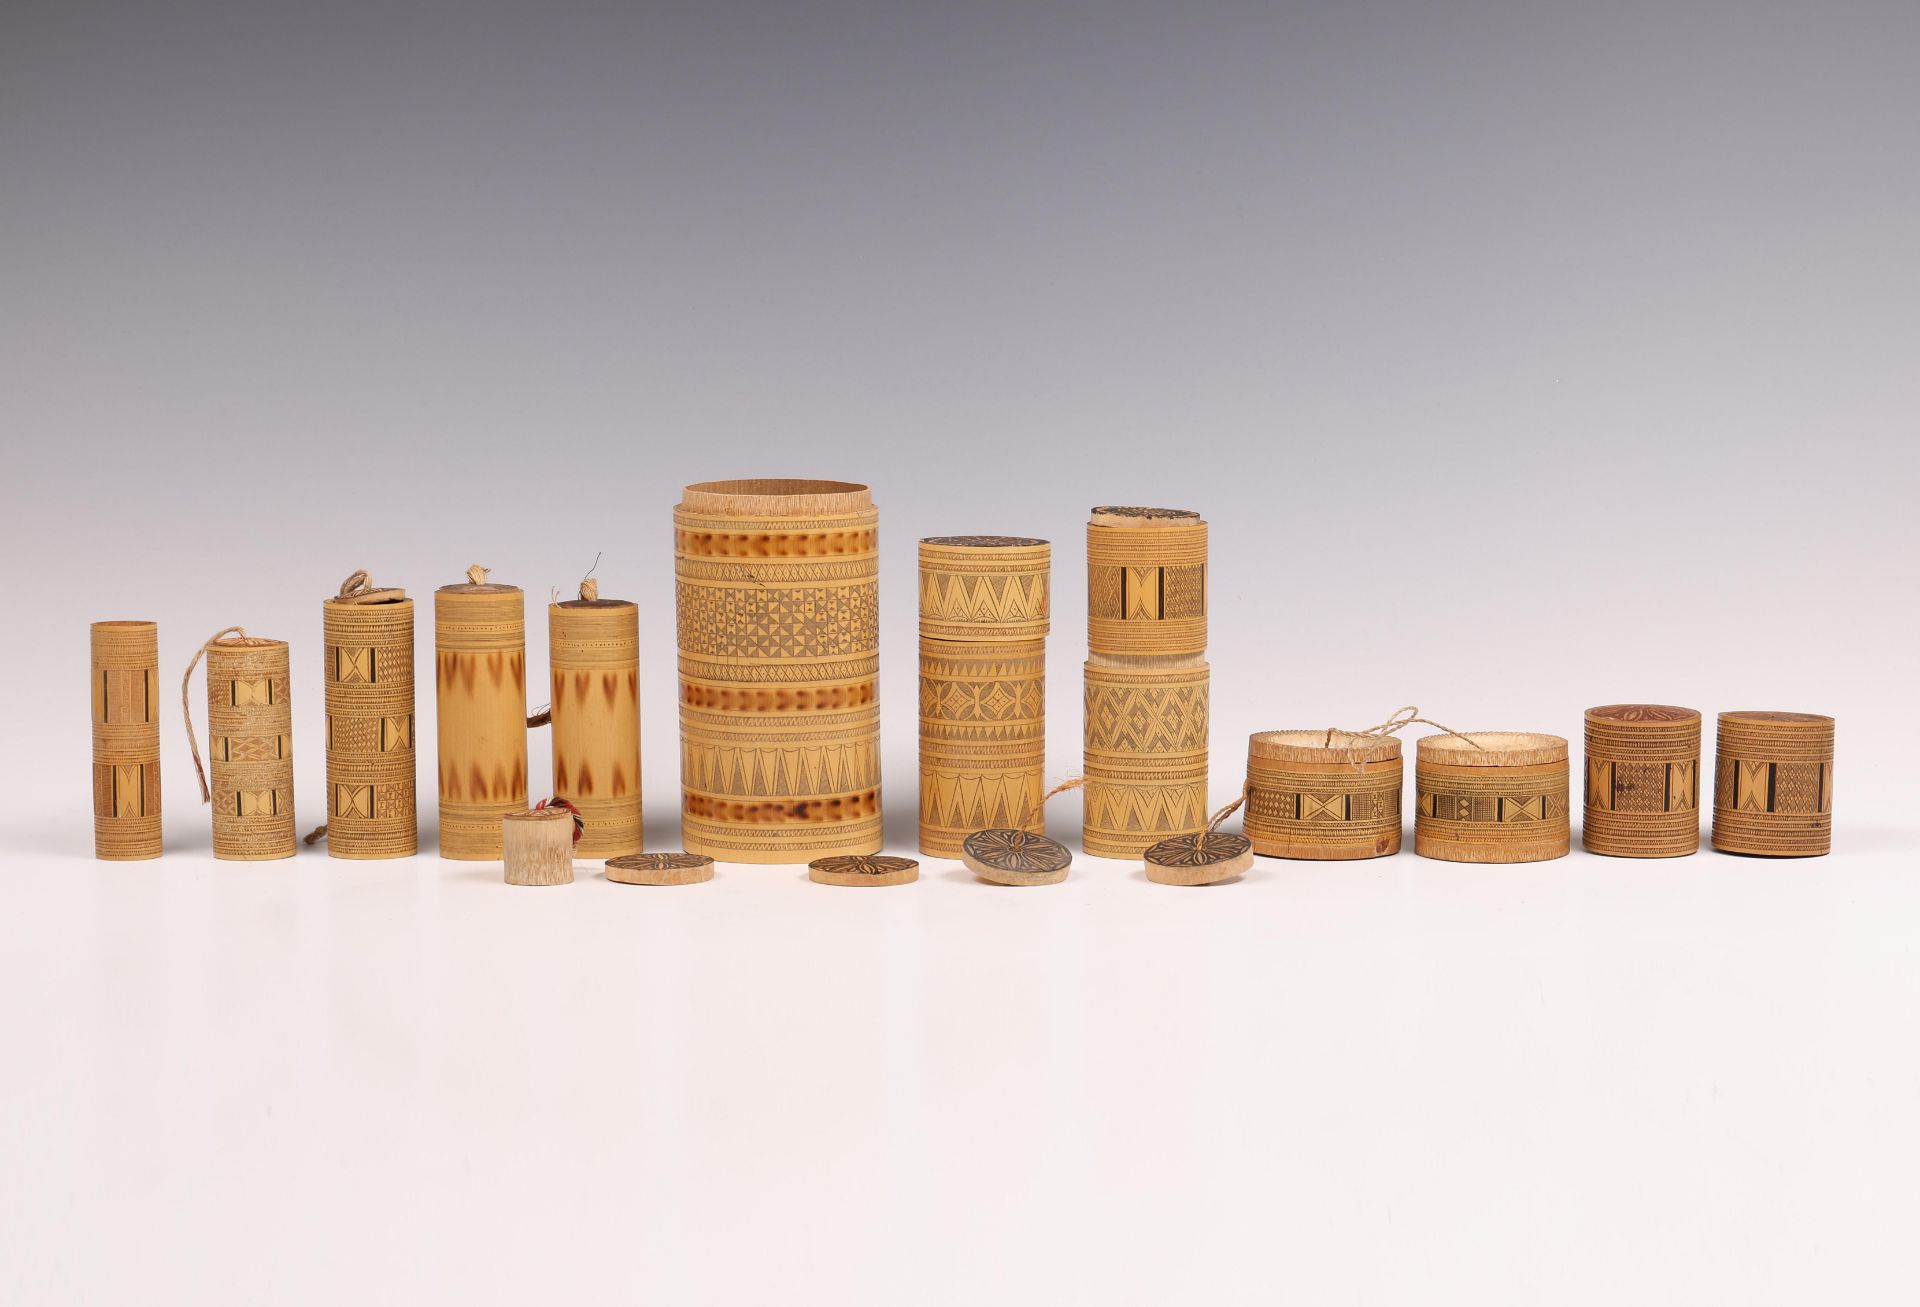 Sulawesi, Toraja, a collection of twelve various bamboo containers.